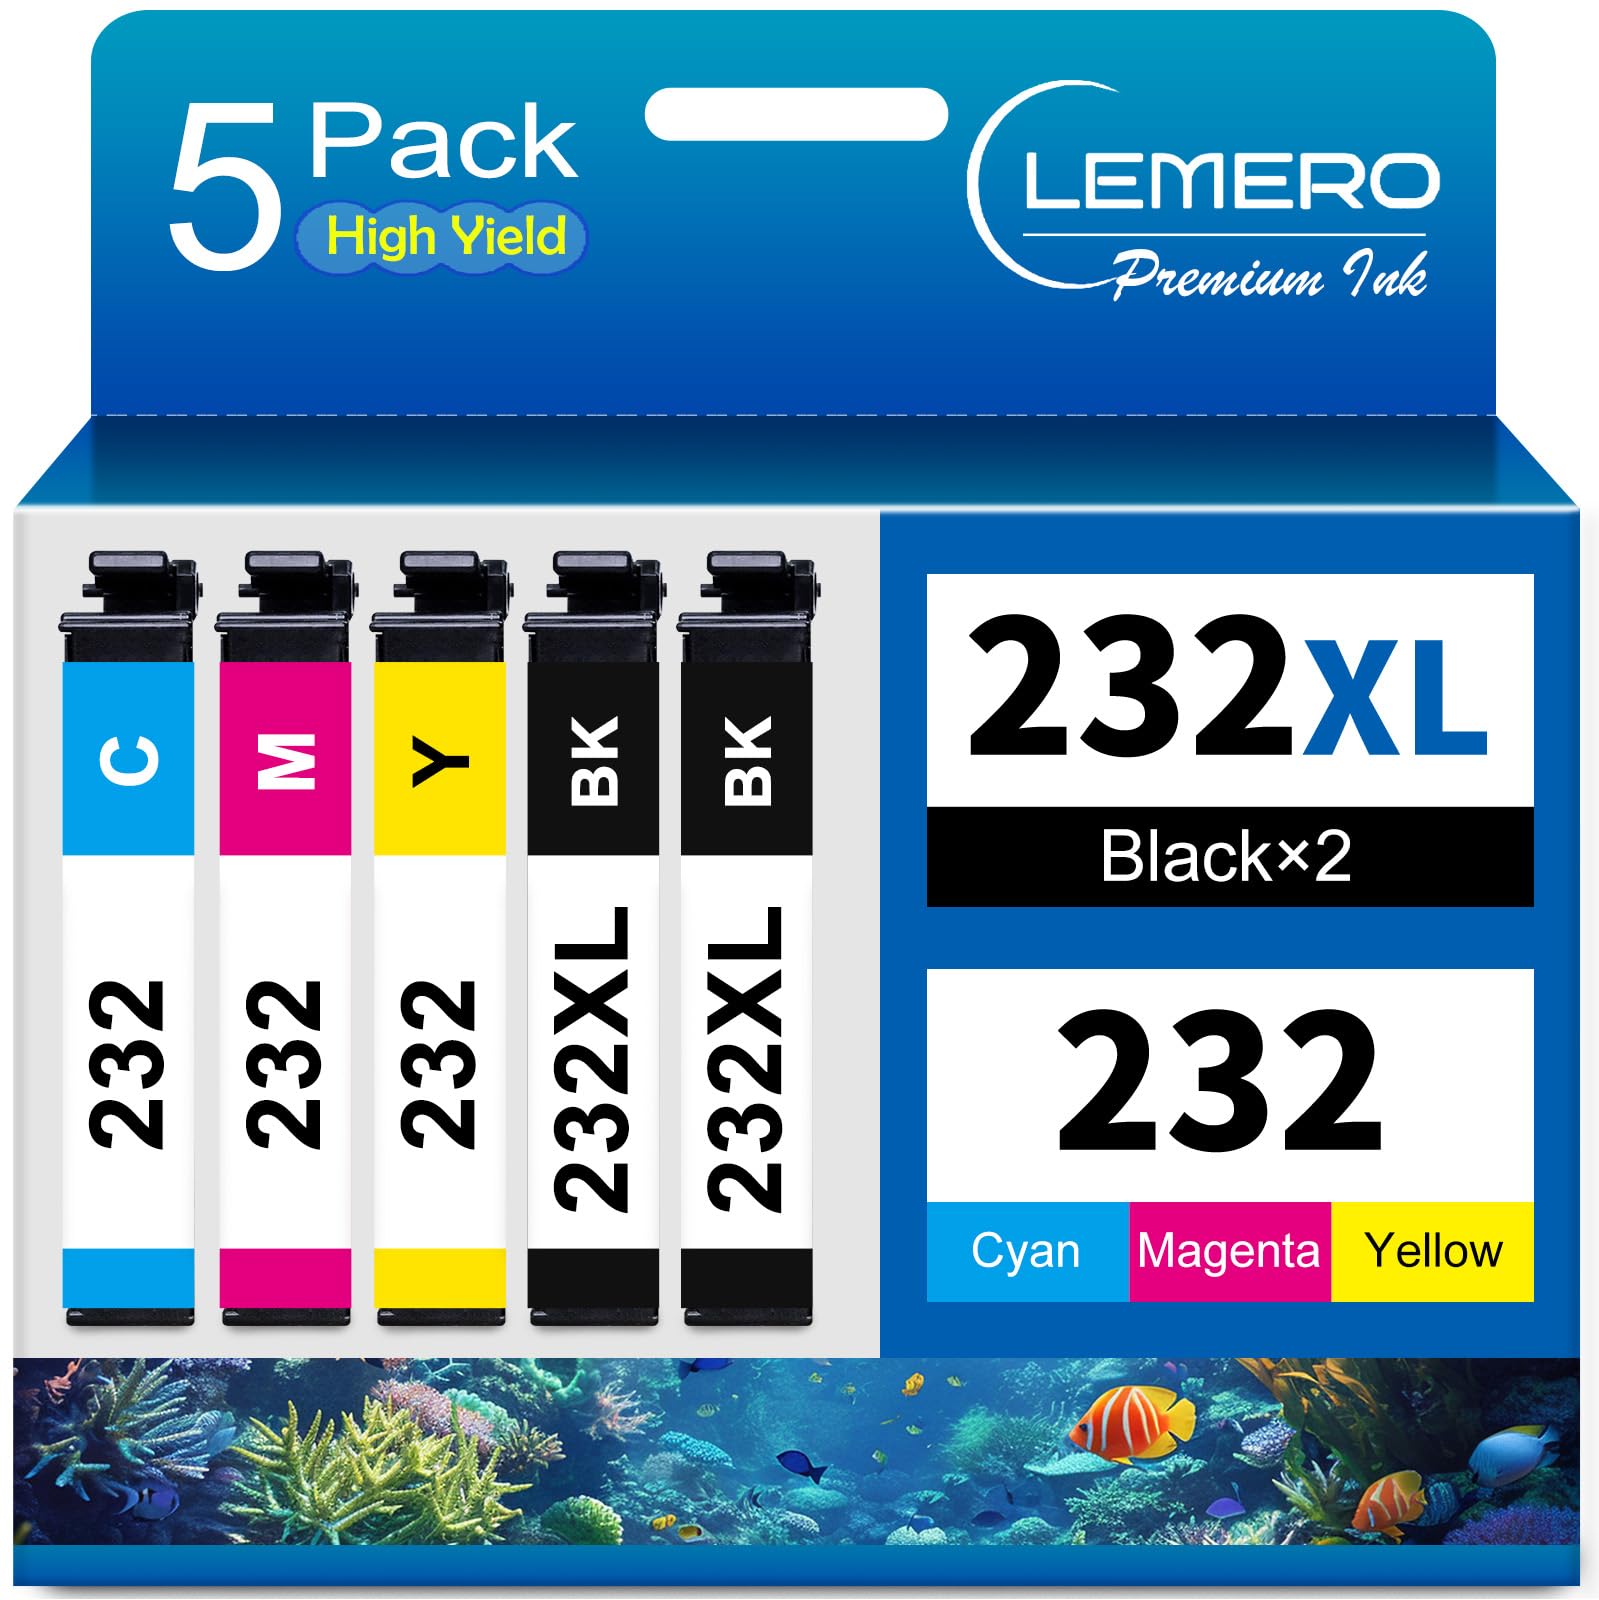 LEMERO Epson 232XL Ink Cartridges: 2 Black, 1 Cyan, 1 Magenta, 1 Yellow Bulk Set of 5 ReplacementLEMERO Premium Ink, 5-Pack High Yield: Packaging for LEMERO ink cartridges showing two black and three colored (cyan, magenta, yellow) cartridge